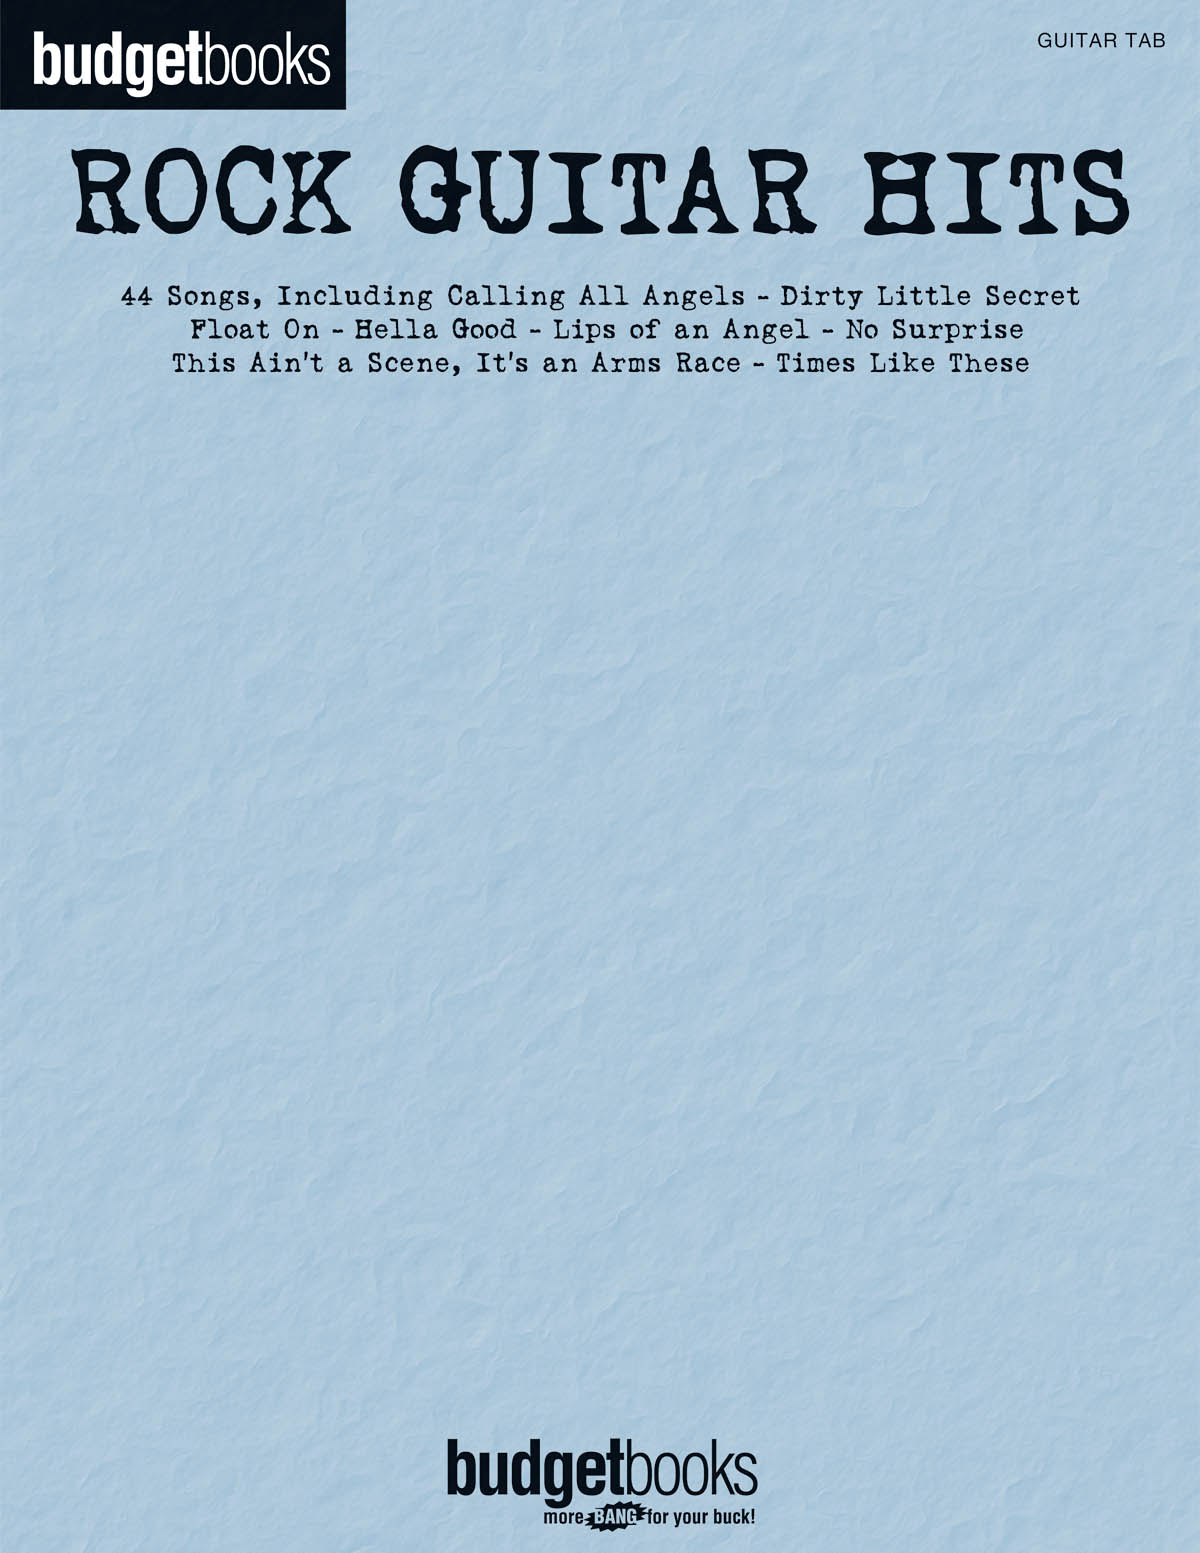 Rock Guitar Hits - Budget Book: Guitar Solo: Mixed Songbook